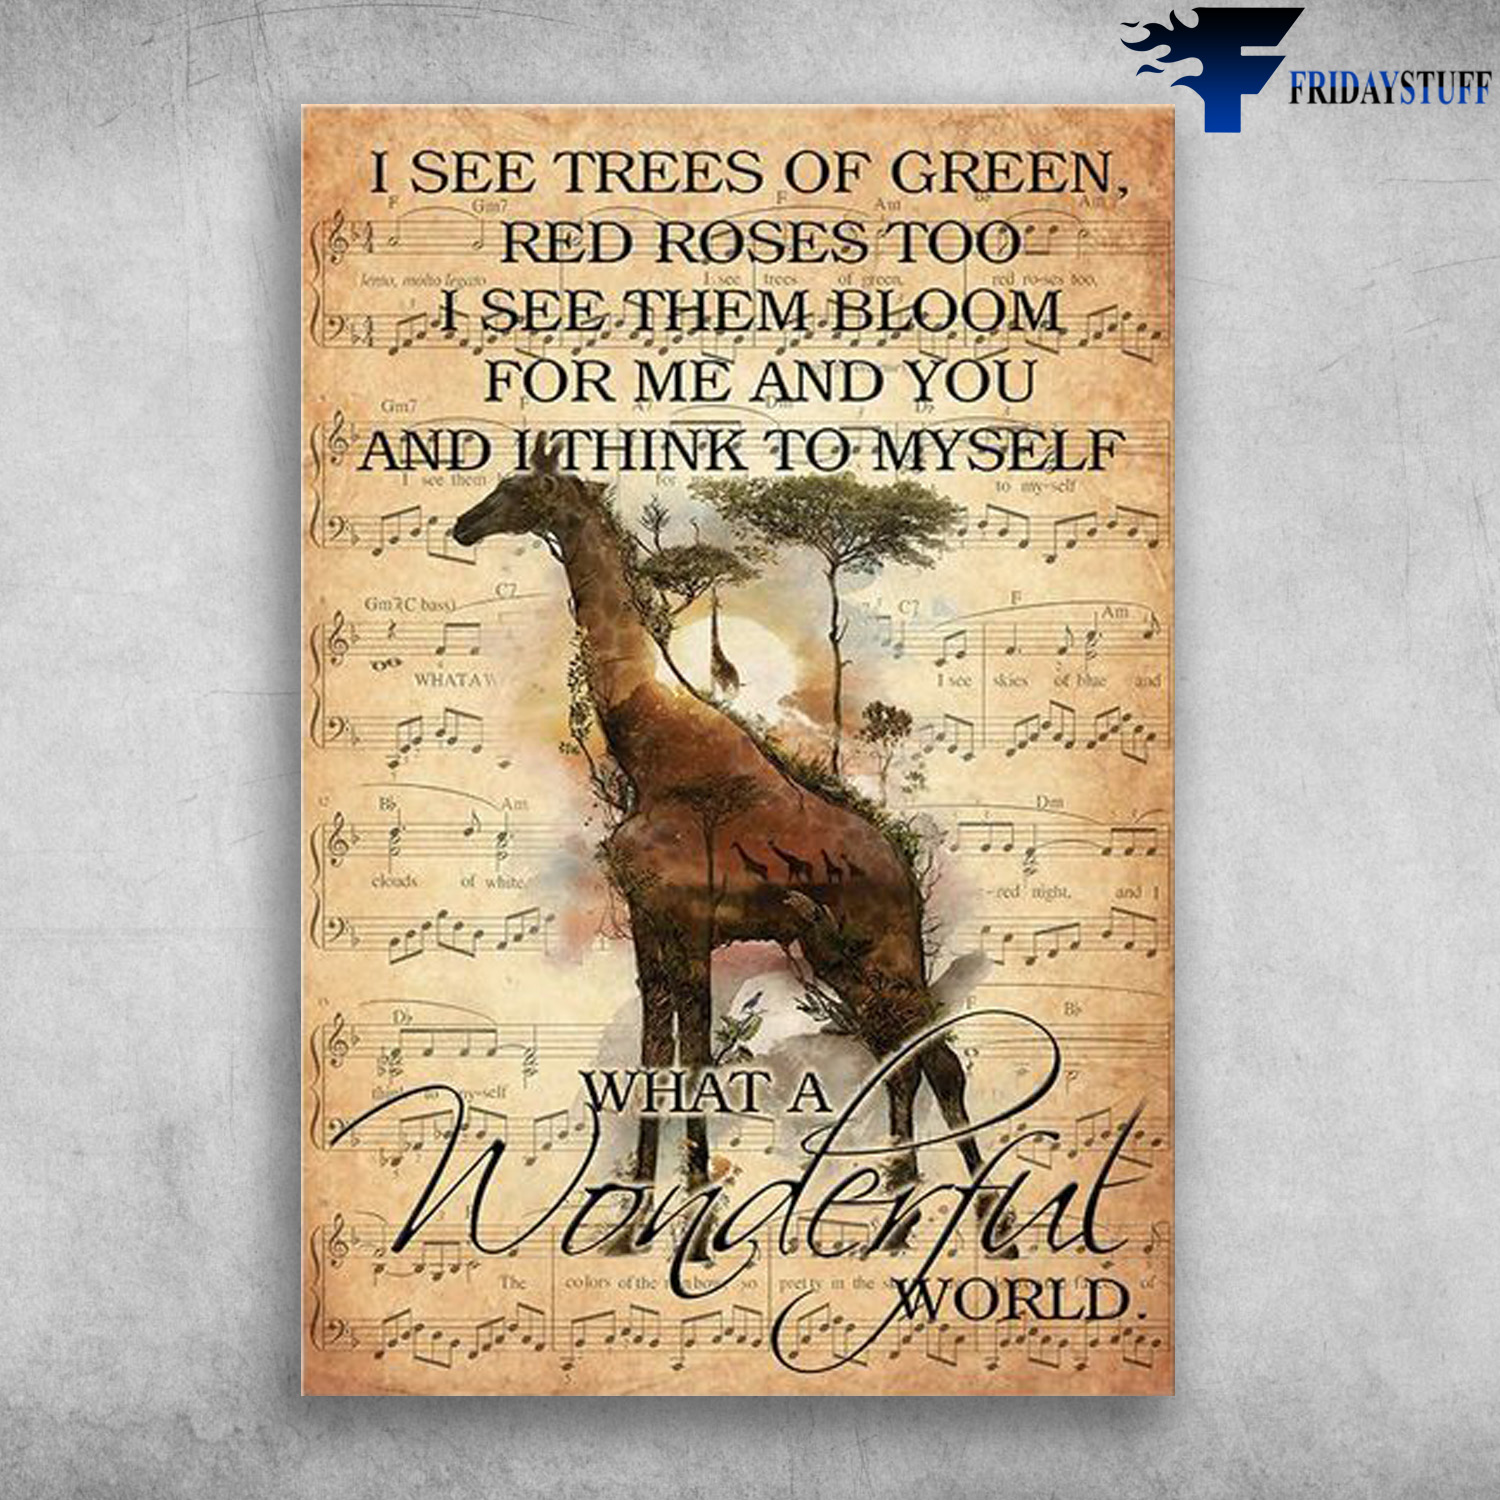 Giraffe Music Sheet - I See Trees Of Green, Red Rose Too, I See Them Bloom, For Me And You, And I Think To Myself, What A Wonderful World